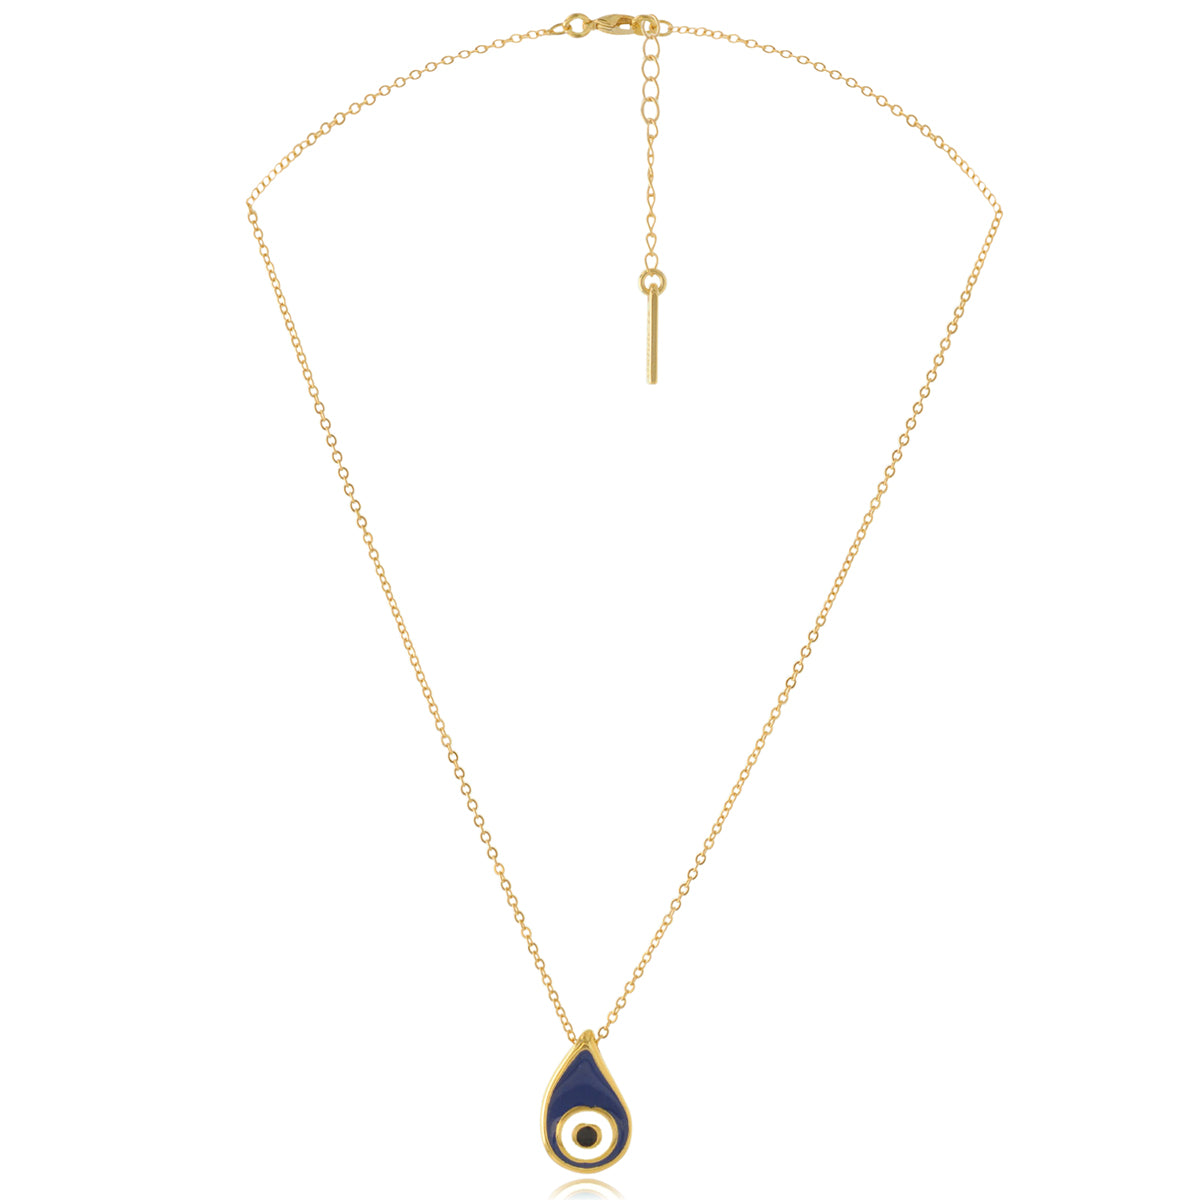 Gold Chain Eye Drop Necklace